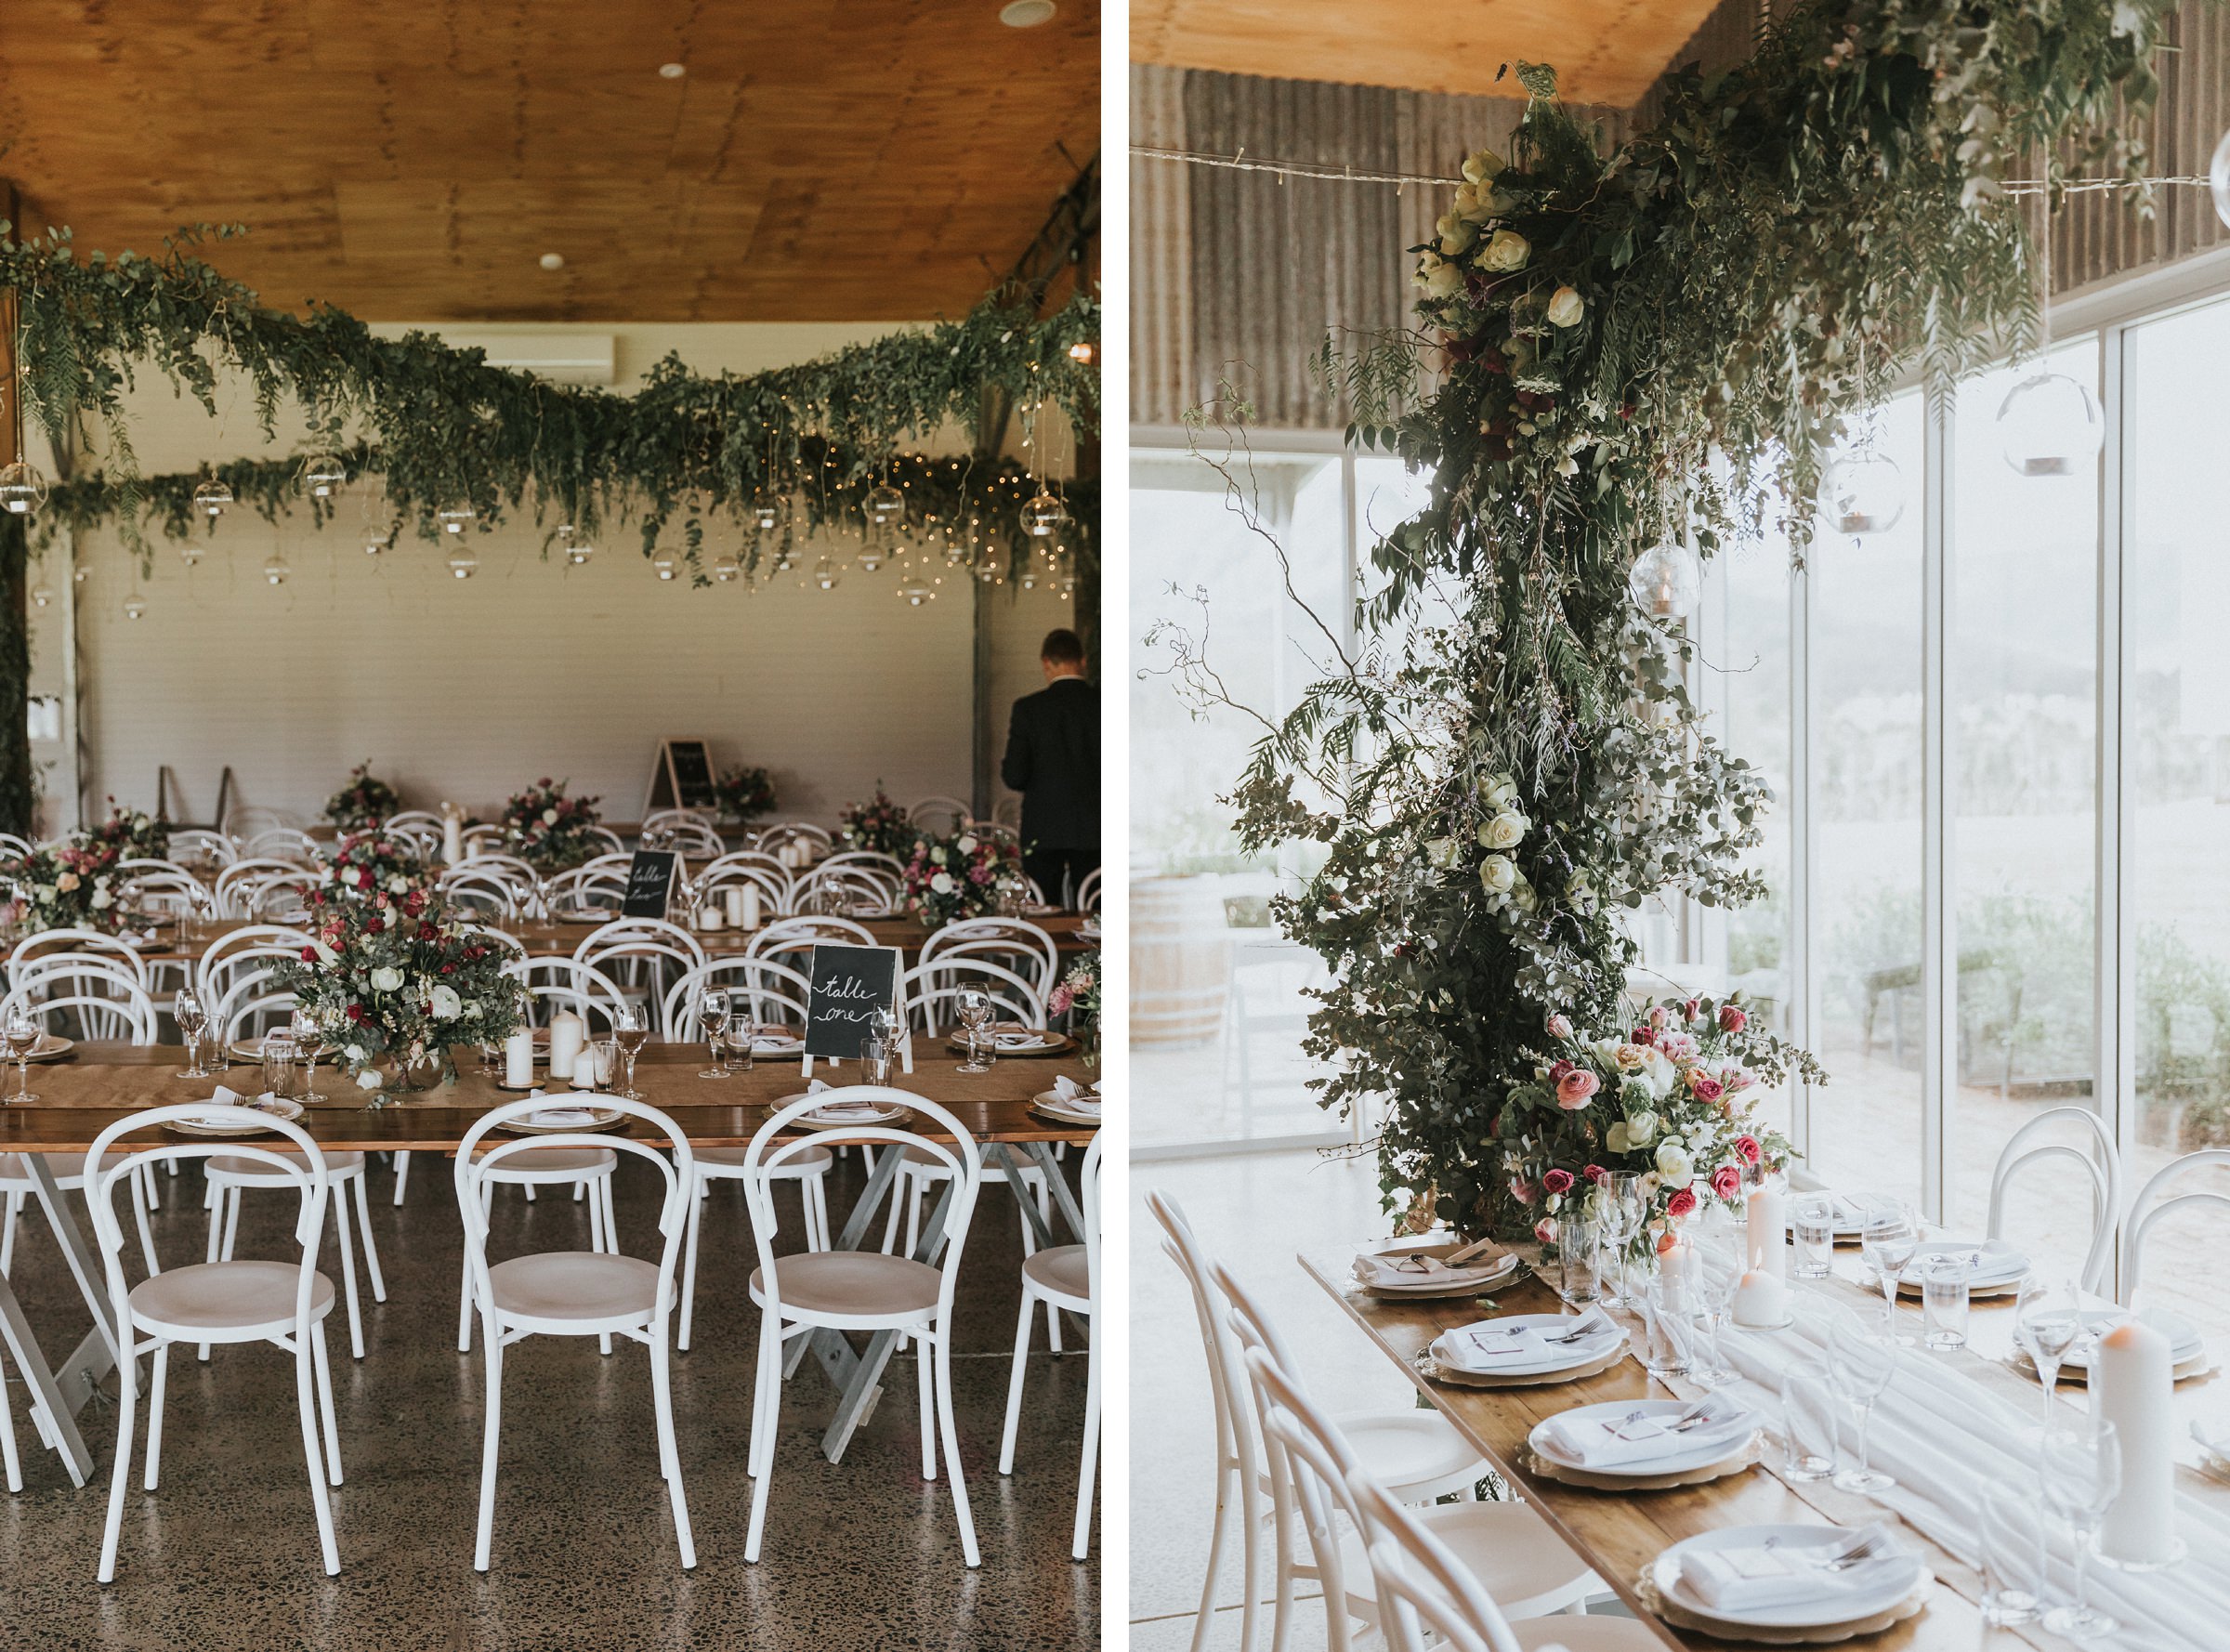 styling at the barn melross farm for wedding reception